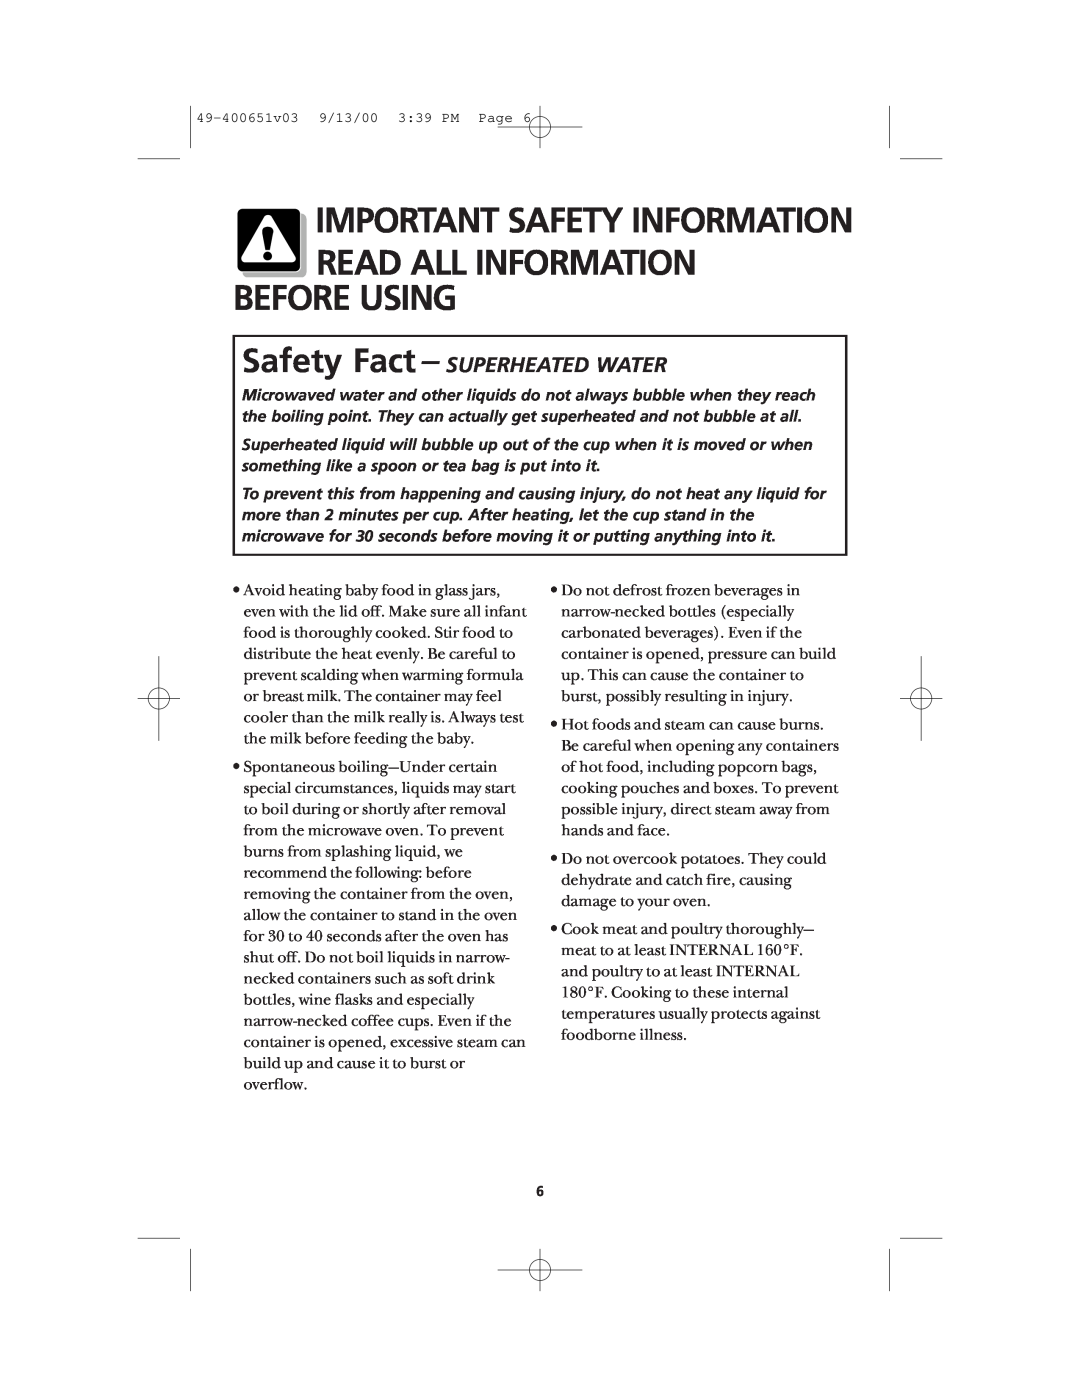 Frigidaire FMT148 warranty Safety Fact - SUPERHEATED WATER, Important Safety Information, Read All Information Before Using 